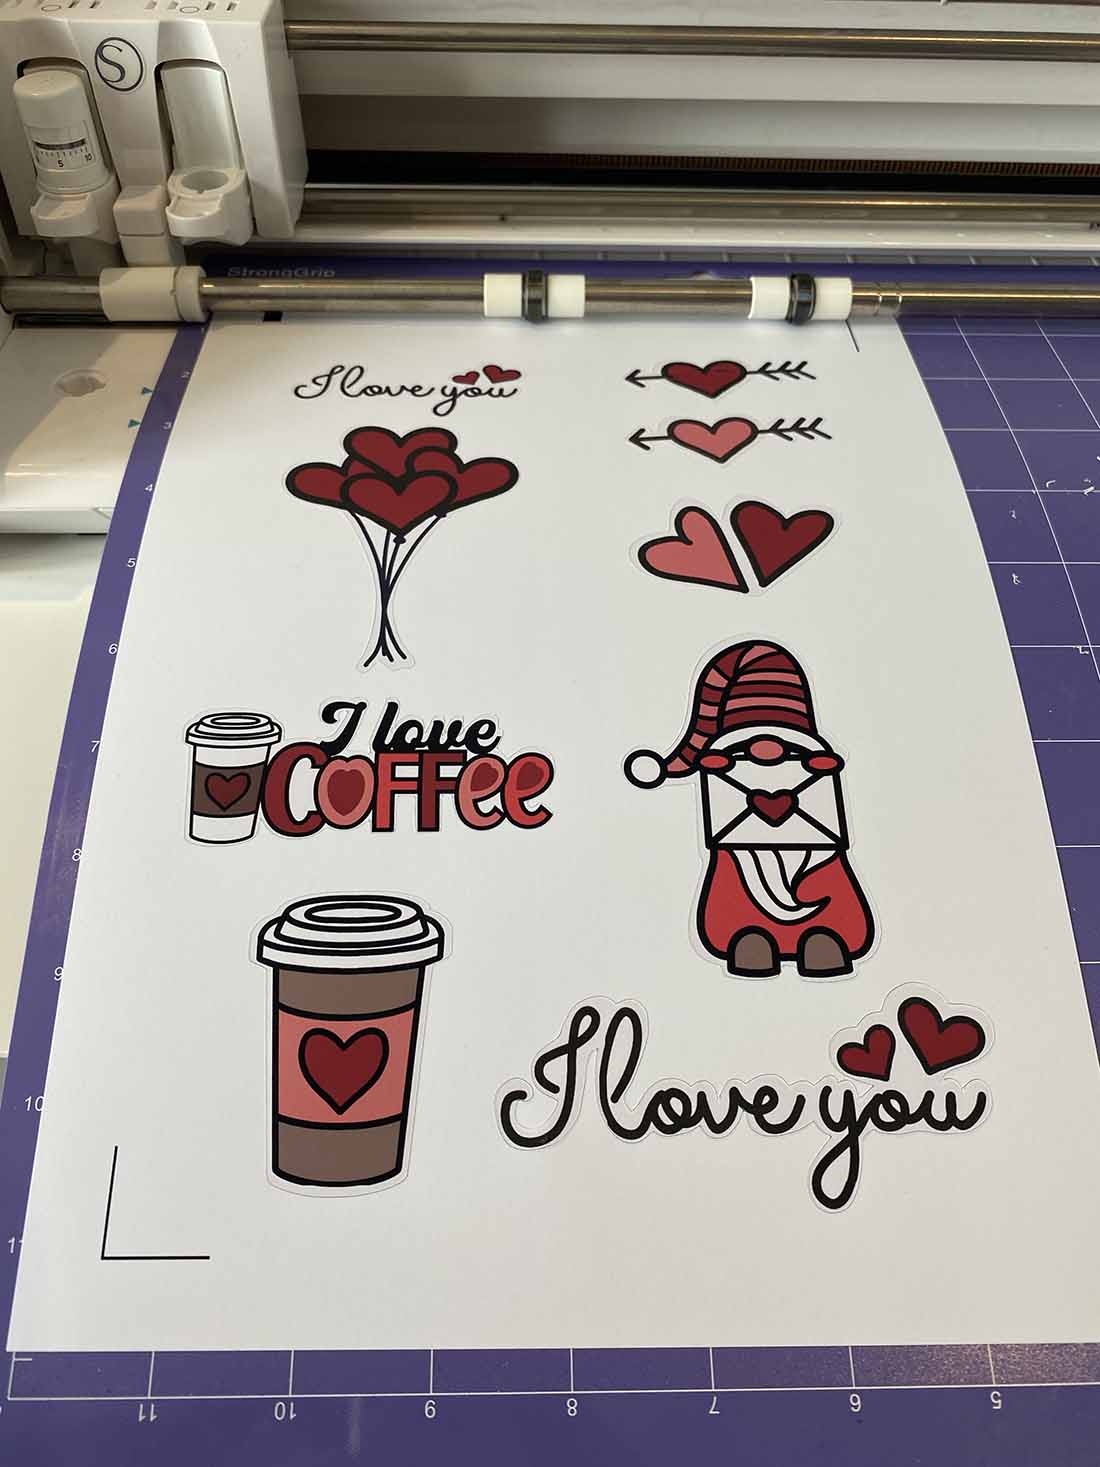 Print and cut free valentines clip art. Using print and cut is so easy in Silhouette design studio. once you have done it you will never look back. It is really simple.